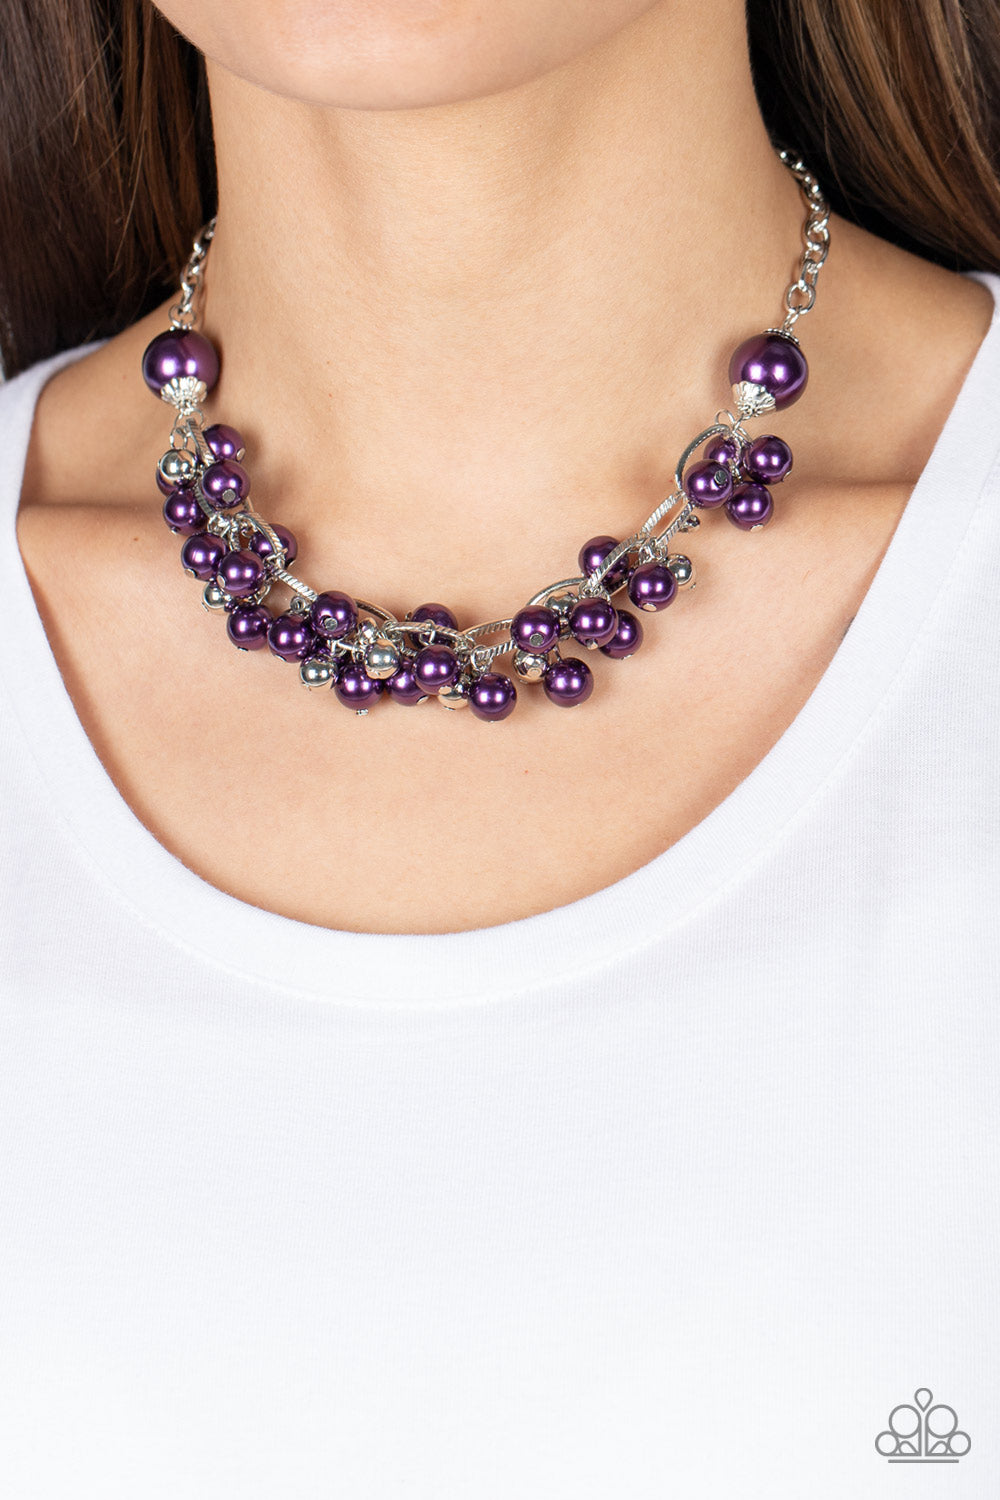 Party Crasher Purple Necklace - Paparazzi Accessories  Two oversized plum pearls give way to a boisterous combination of textured silver links, shiny silver beads, and plum pearls, resulting into a noisemaking fringe below the collar. Features an adjustable clasp closure.  Sold as one individual necklace. Includes one pair of matching earrings.